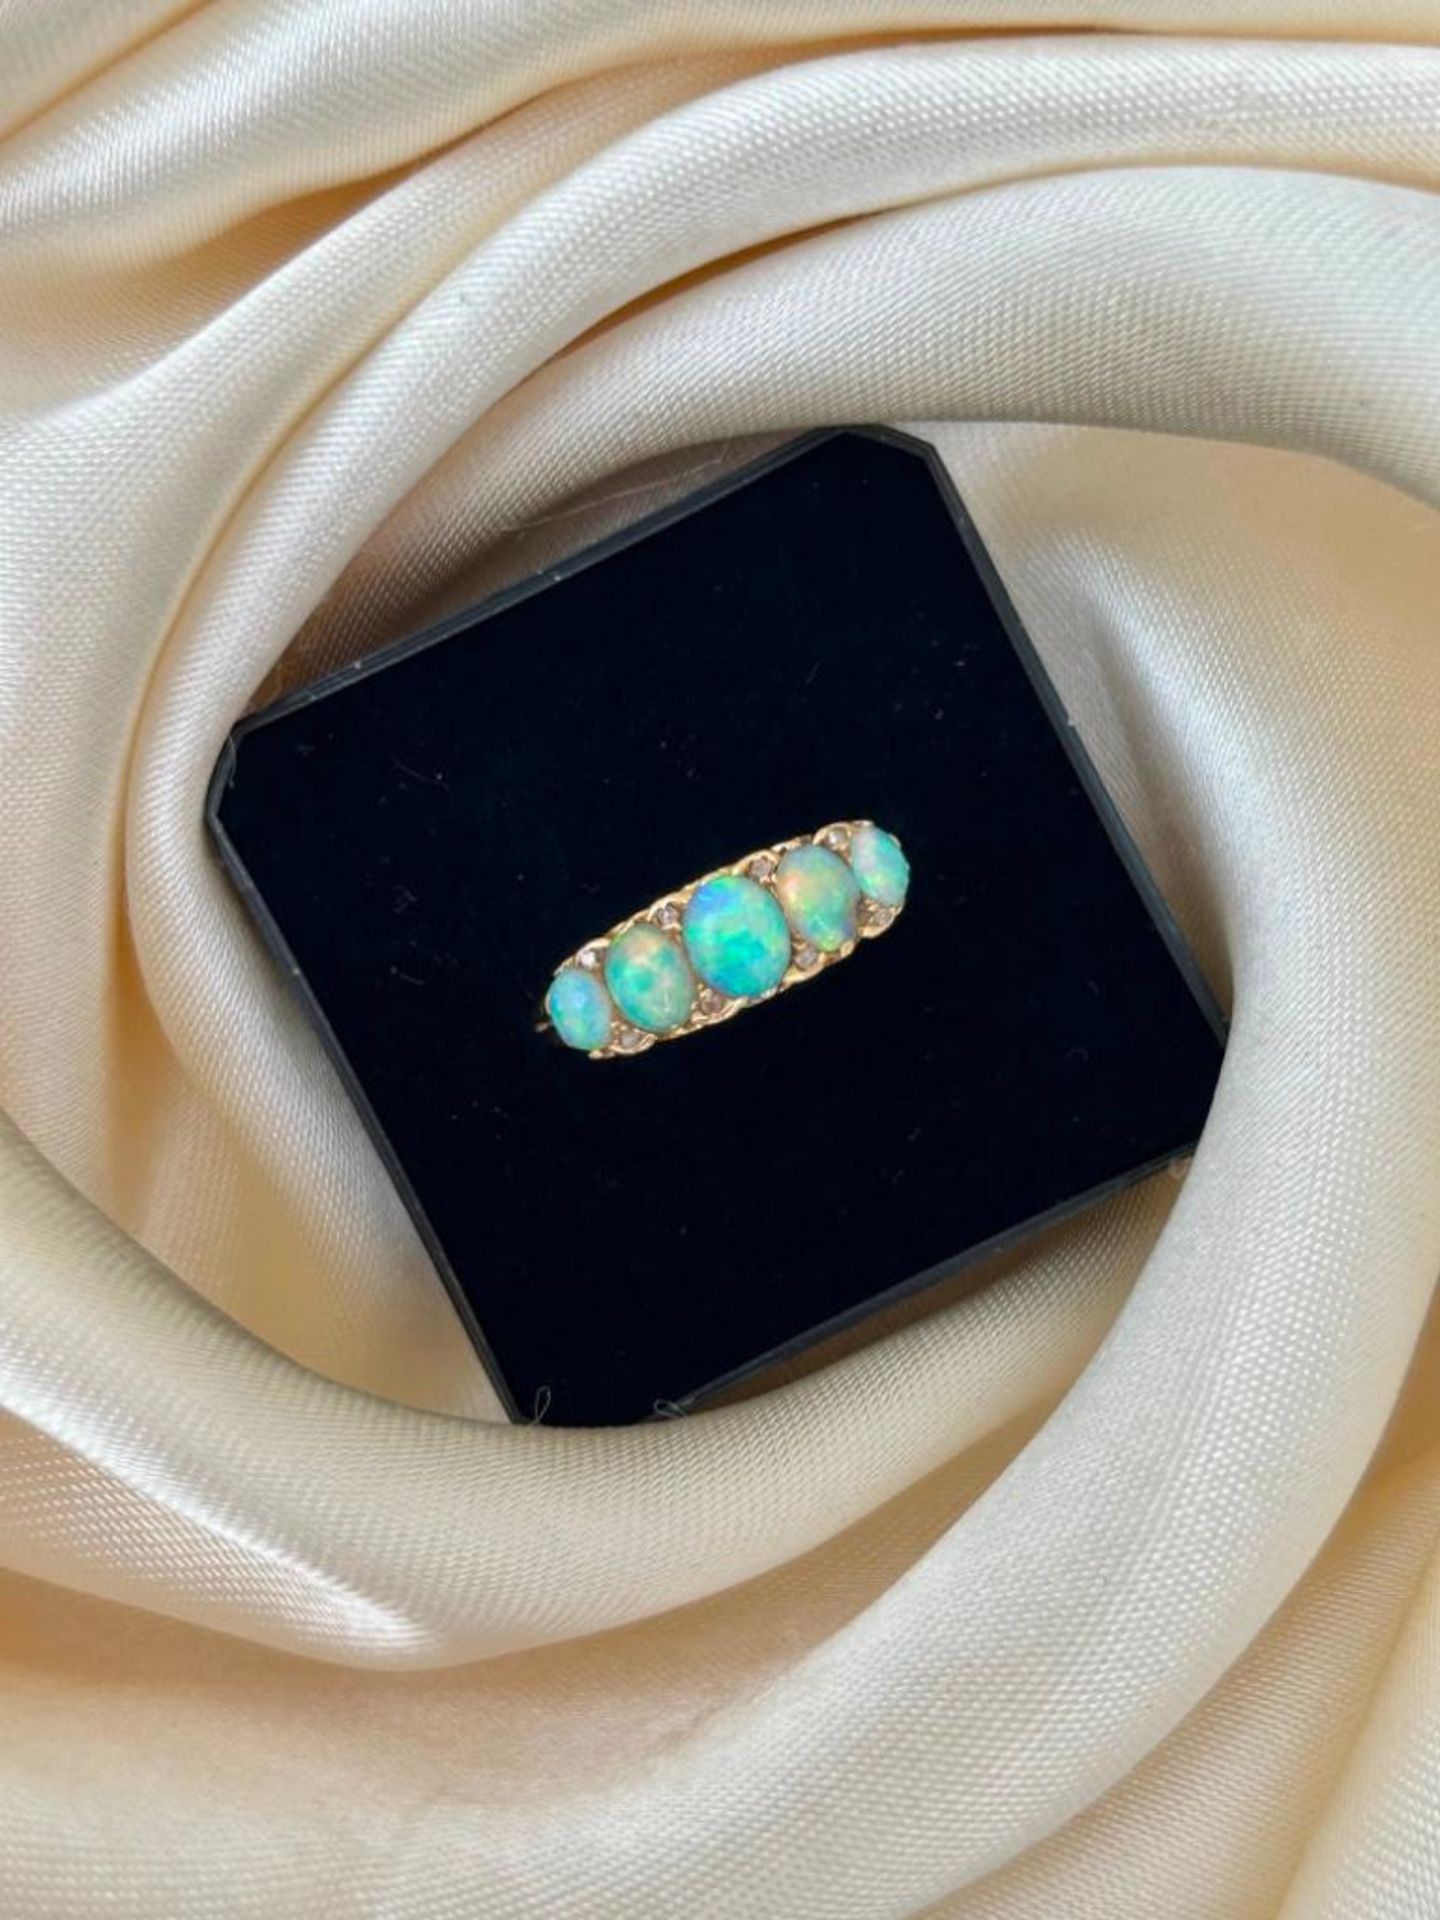 Antique 18ct Yellow Gold Scroll Gallery Opal and Diamond 5 Stone Ring - Image 4 of 6